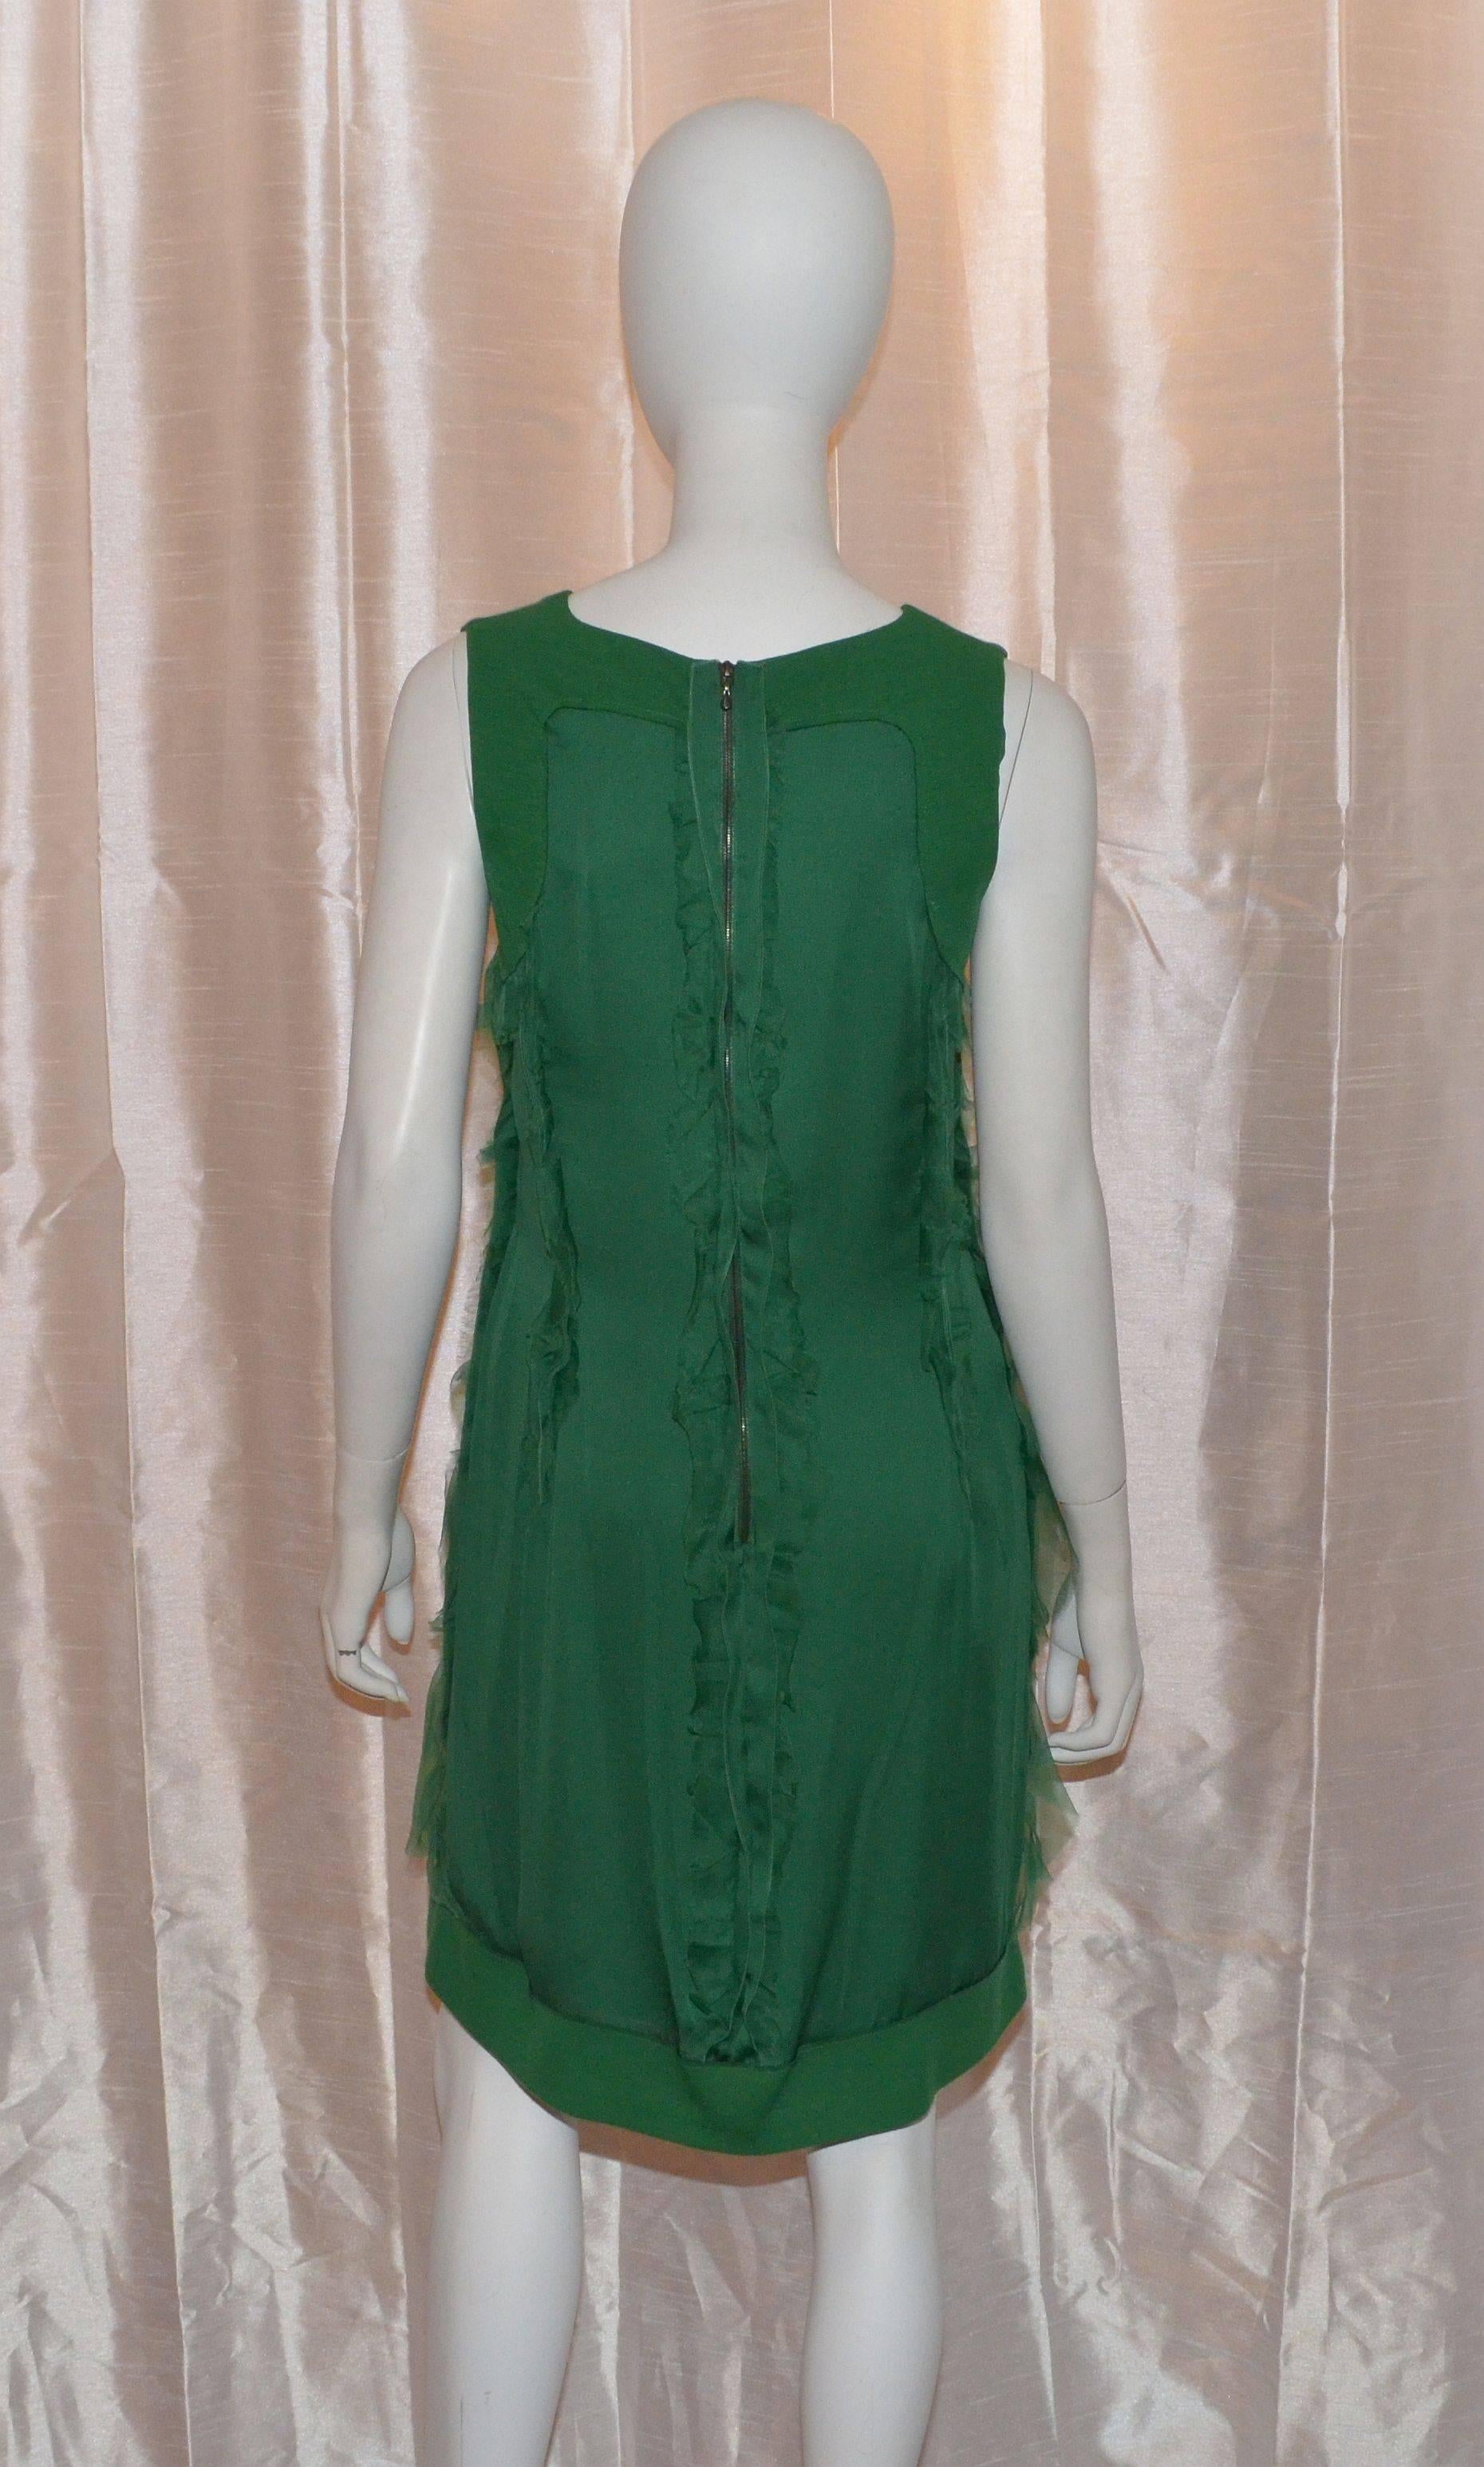 Lanvin dress is made with 100% wool and silk chiffon fabric, ruffled detailing throughout back zipper and snap closures, and fully lined in 100% silk. Made in France, size 40. Original tags still attached. Gorgeous emerald green